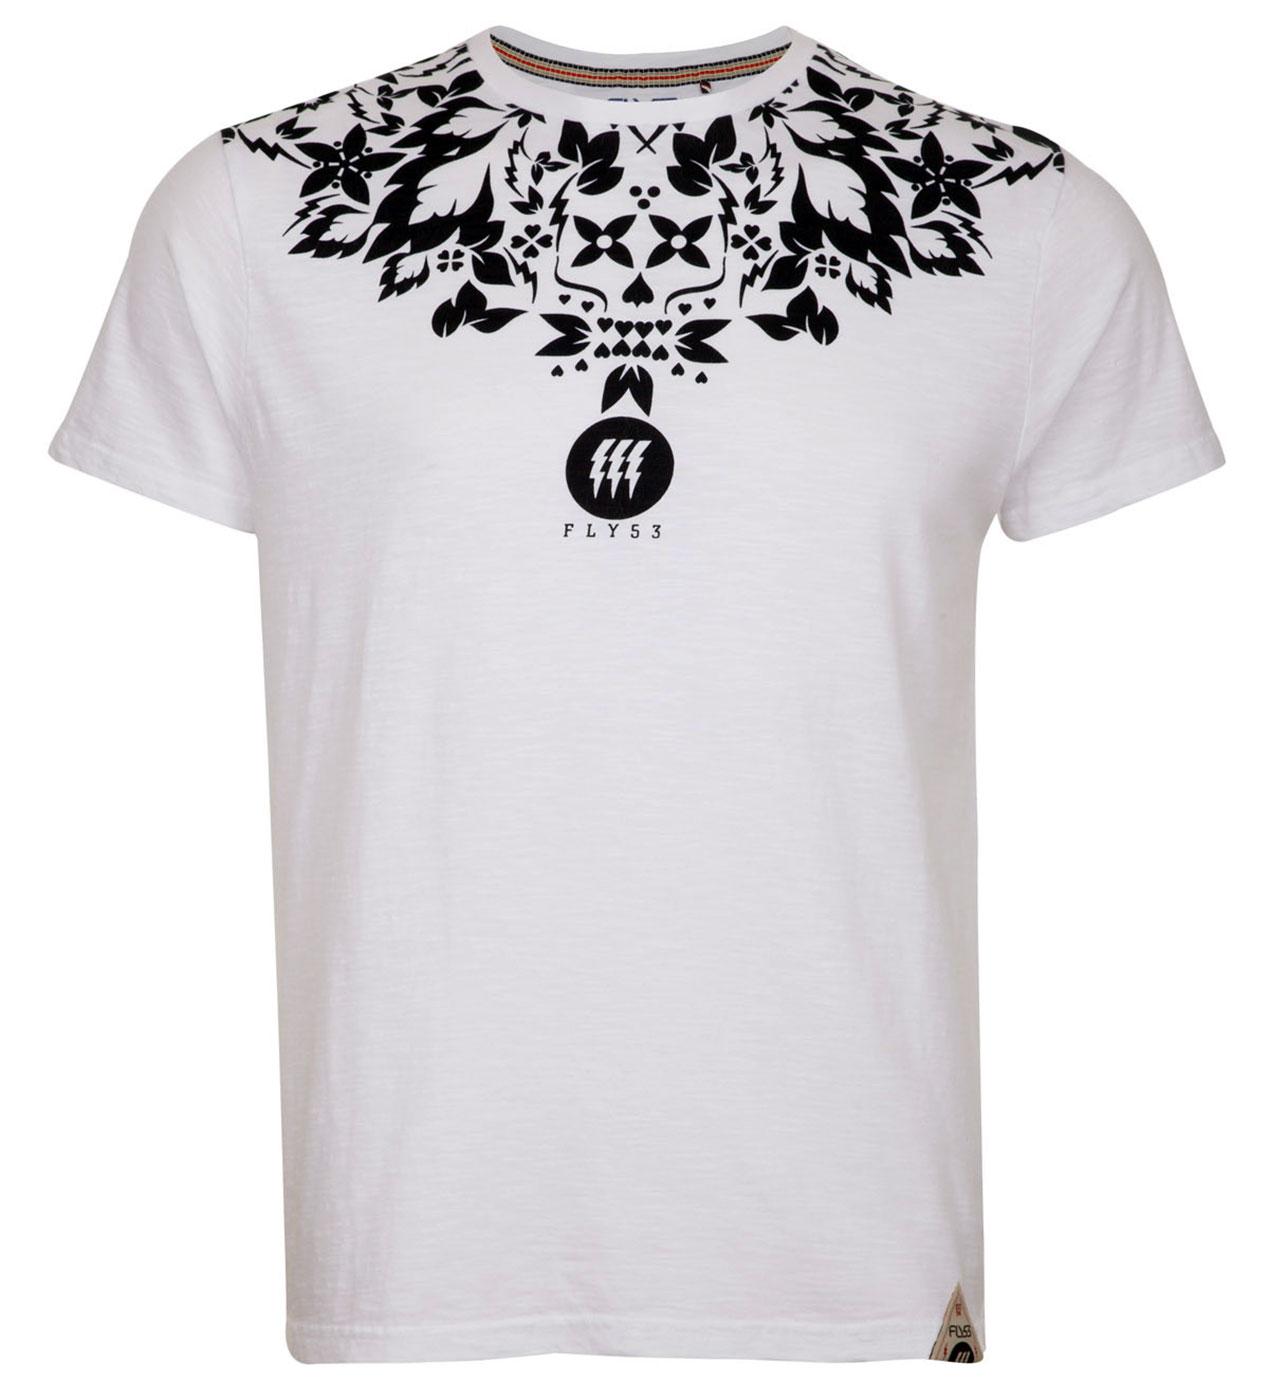 FLY53 Plastic Bomb Retro 1970s Floral Neck Print T-shirt in White